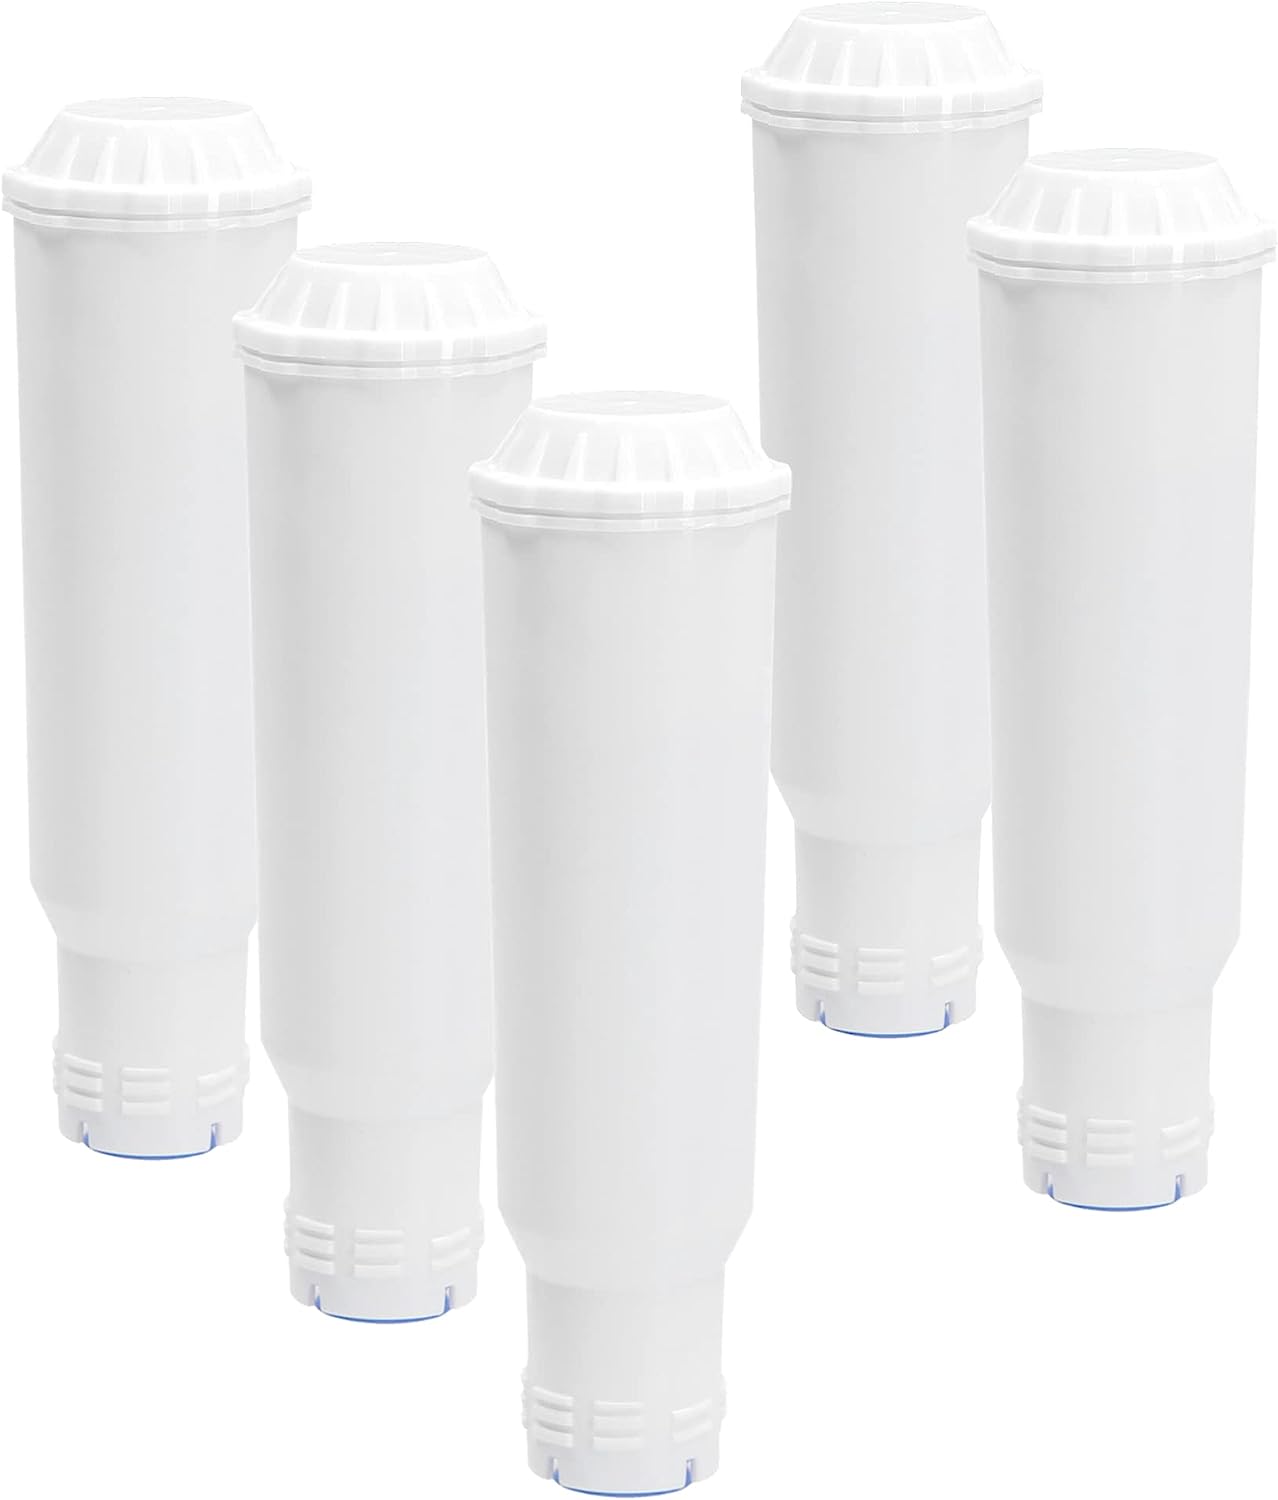 Von Bueren 5 x Filter Search as Krups Claris Water Filter F088, i.e. for many fully automatic coffee machines from AEG, Bosch, Siemens, Nivona, Melitta